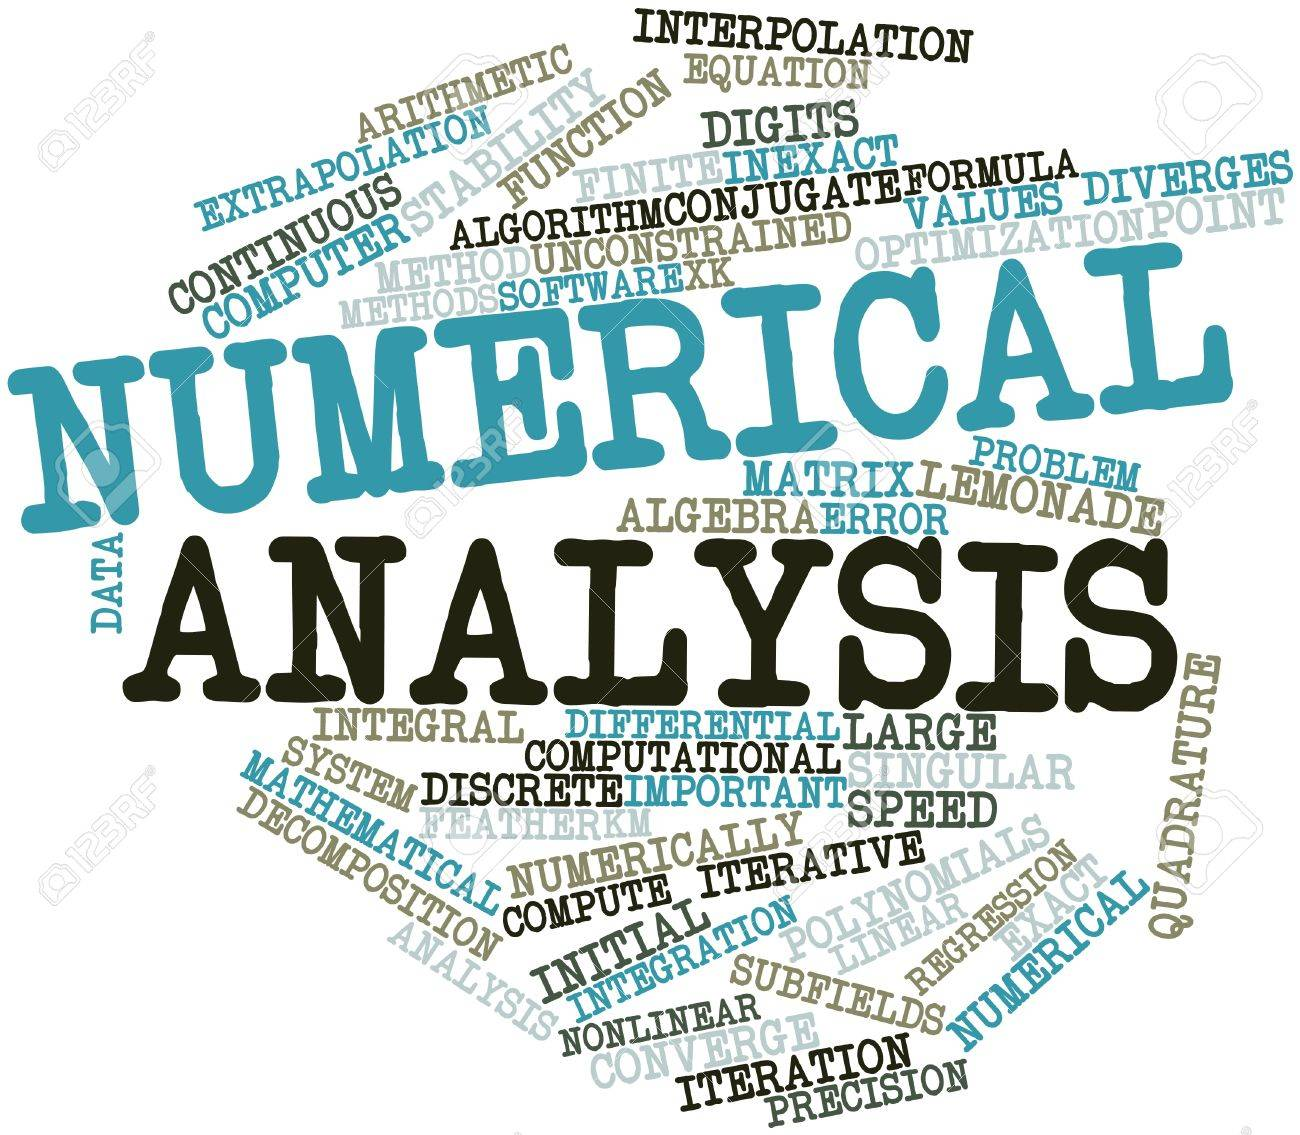 MA214 - Introduction to Numerical Analysis